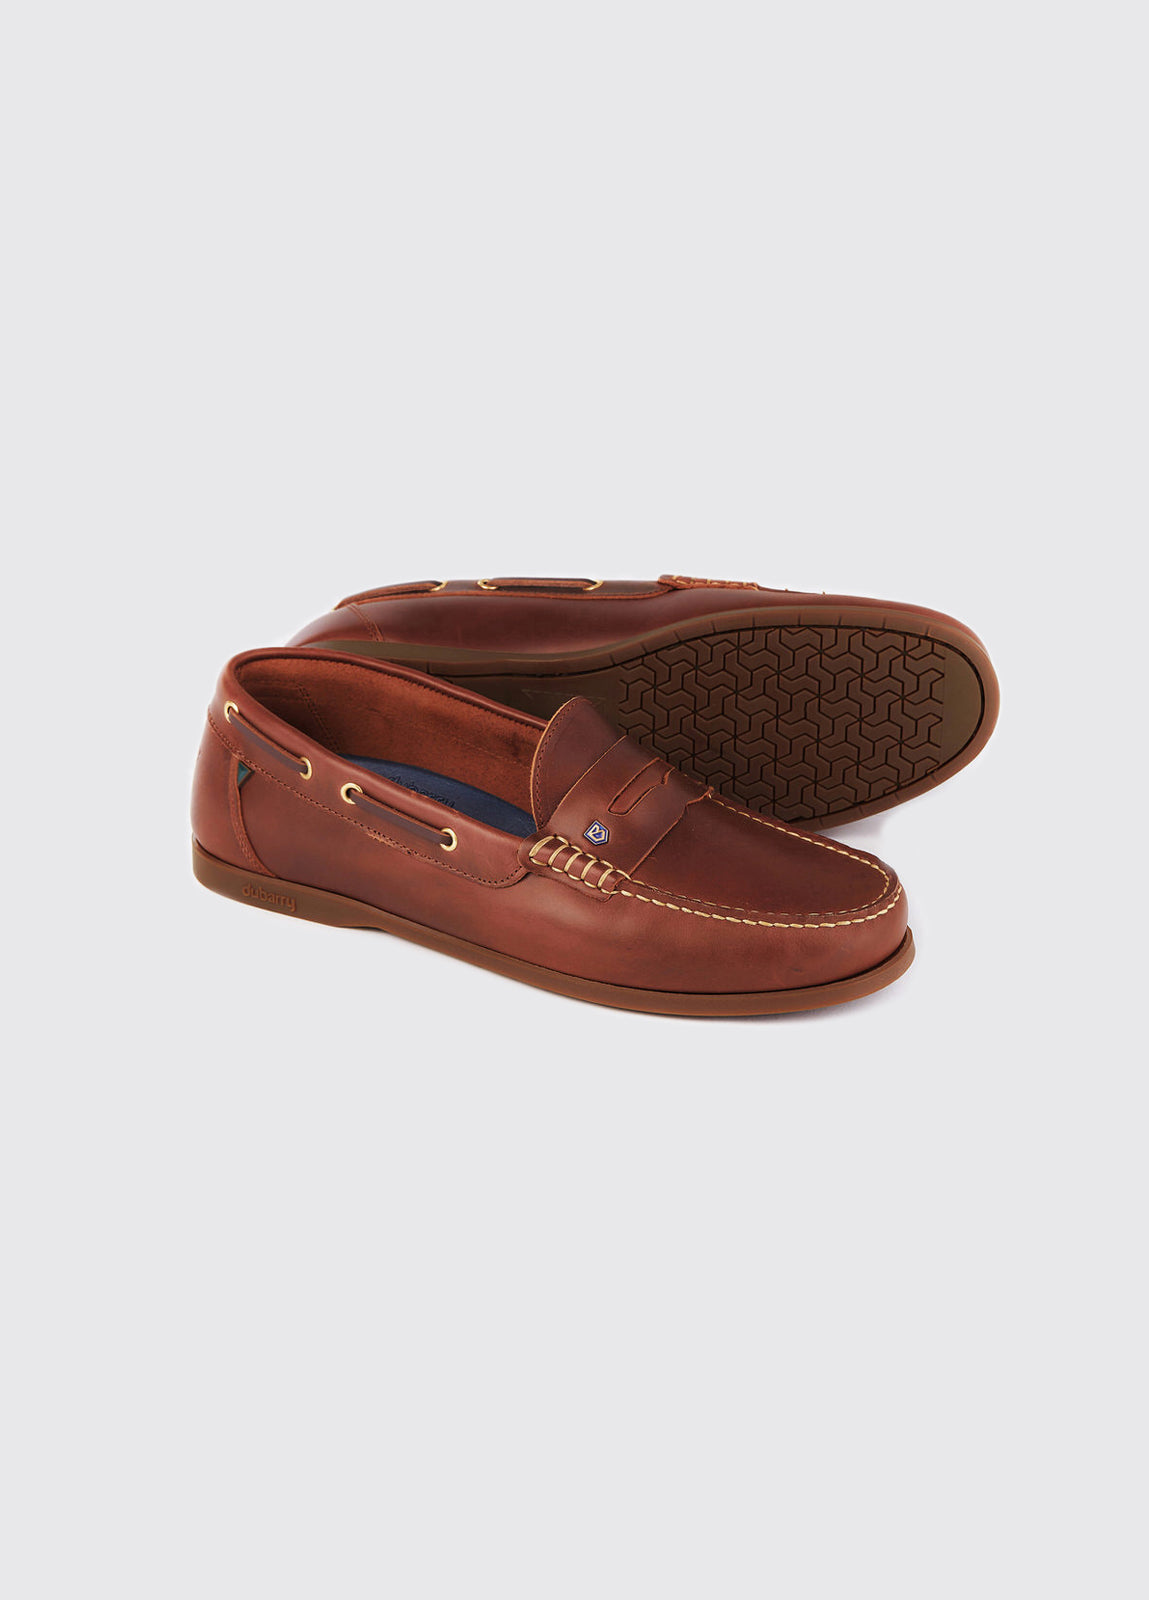 Dubarry Spinnaker Boat Shoes - Brown